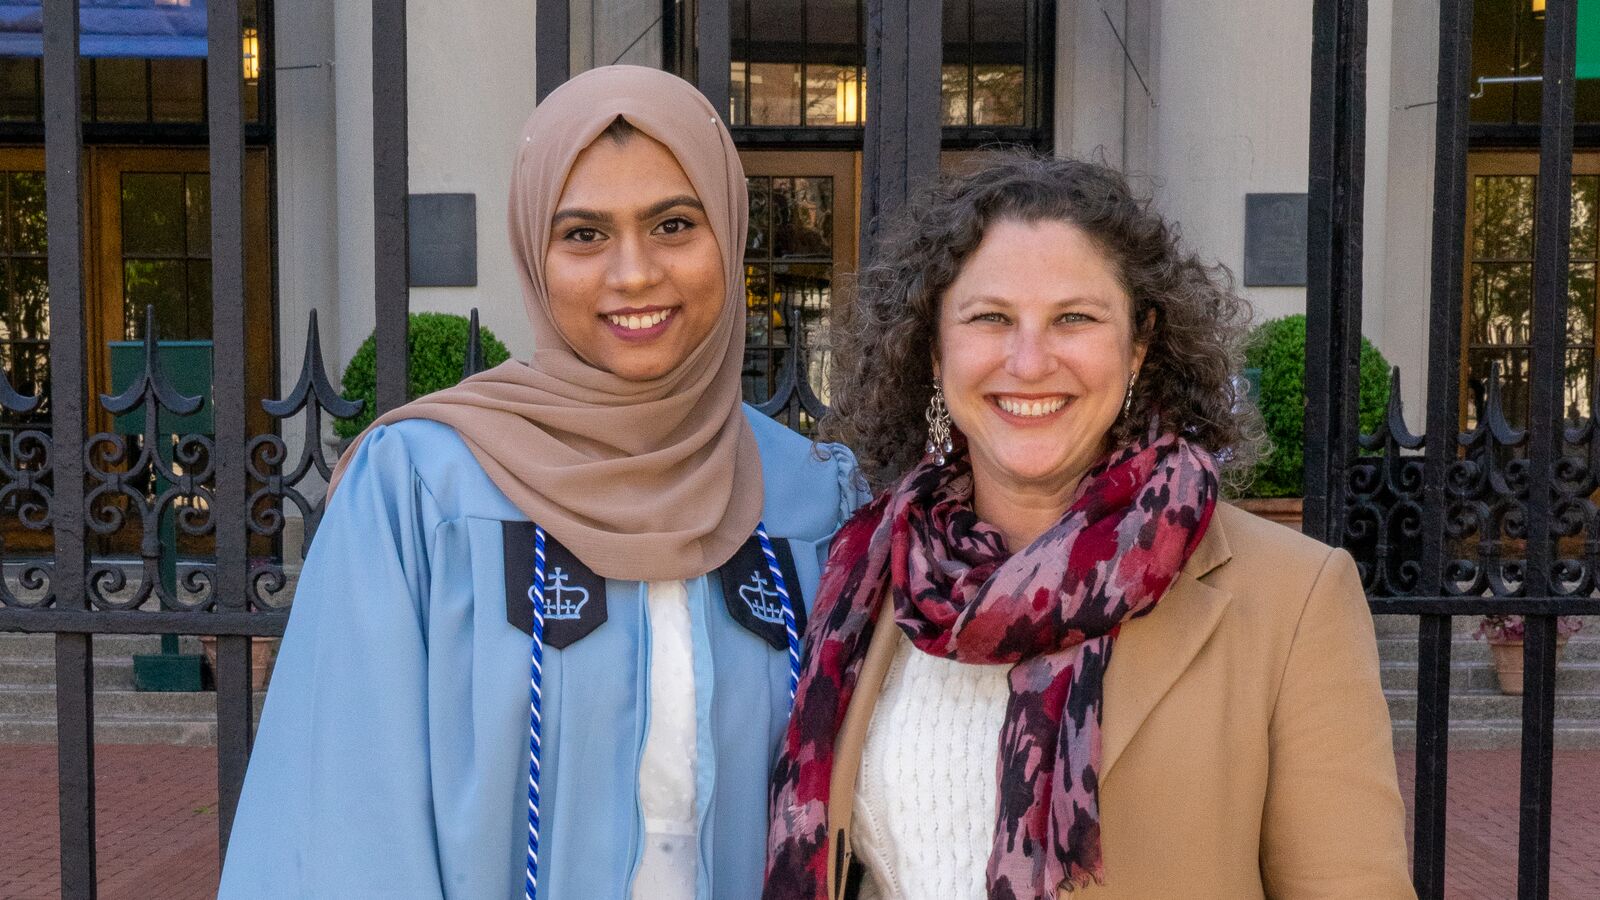 In May 2021, Sultana graduated from her dream school, and Rema was there to celebrate with her.